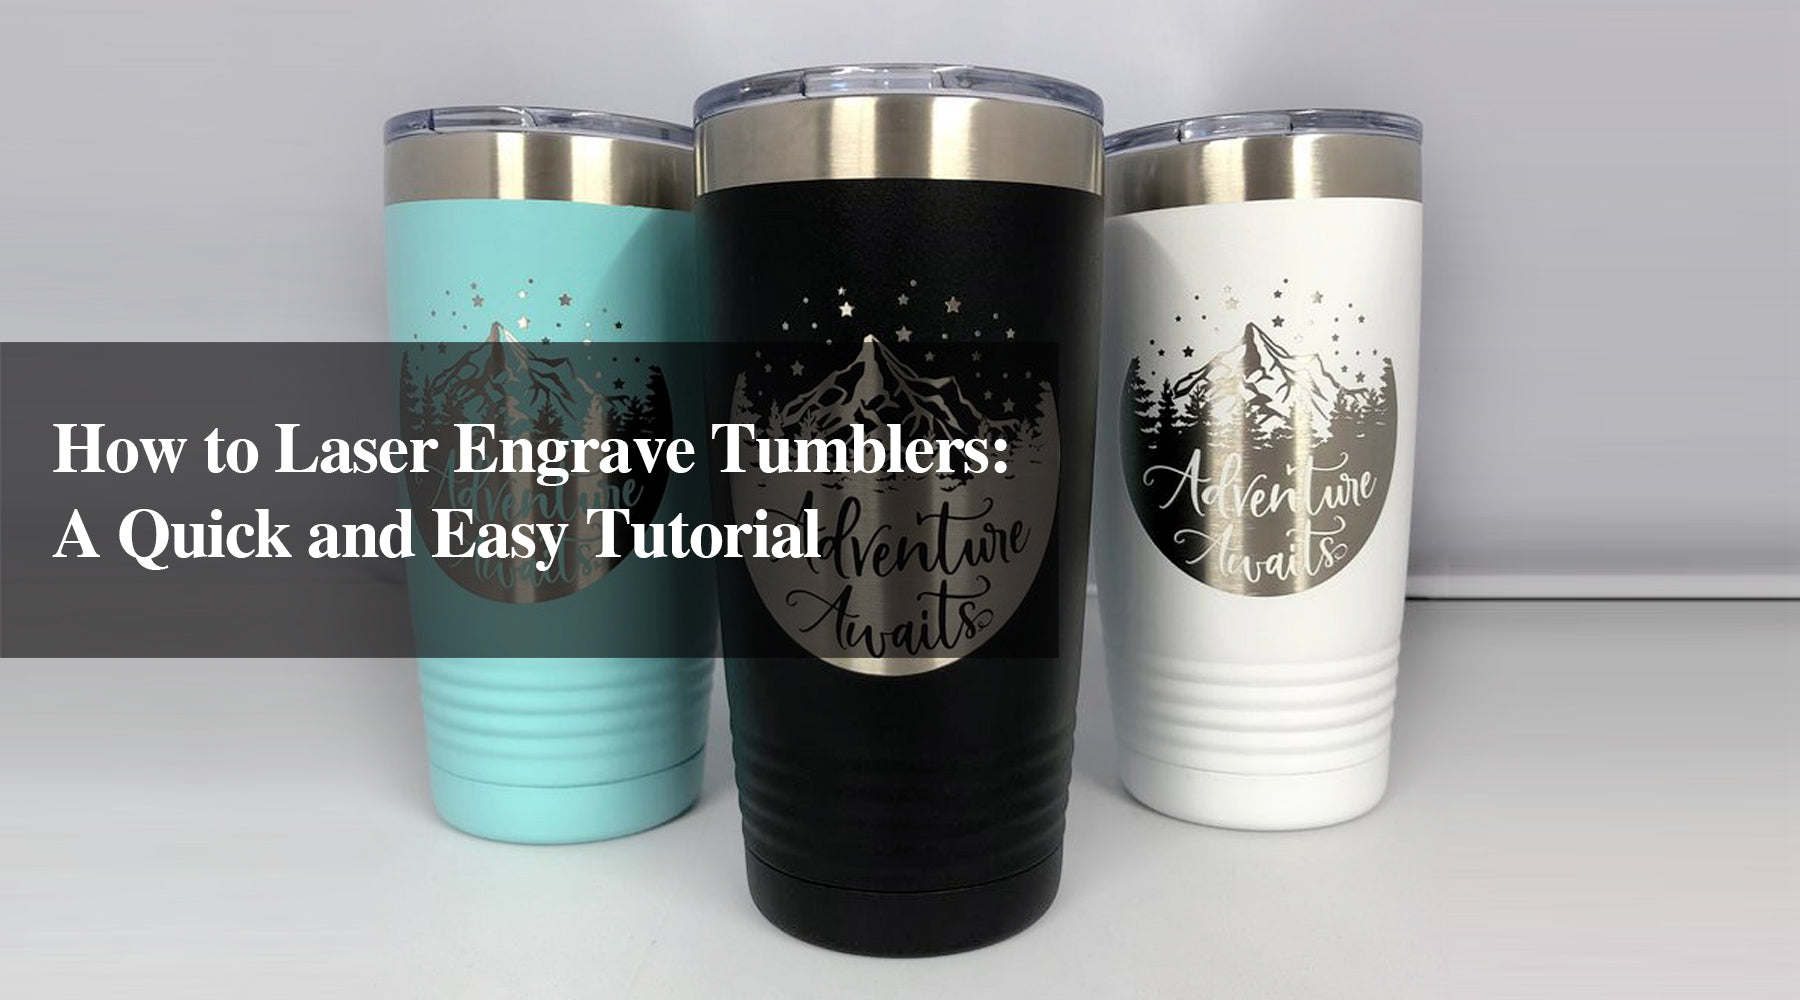 How to Laser Engrave Tumblers: A Quick and Easy Tutorial